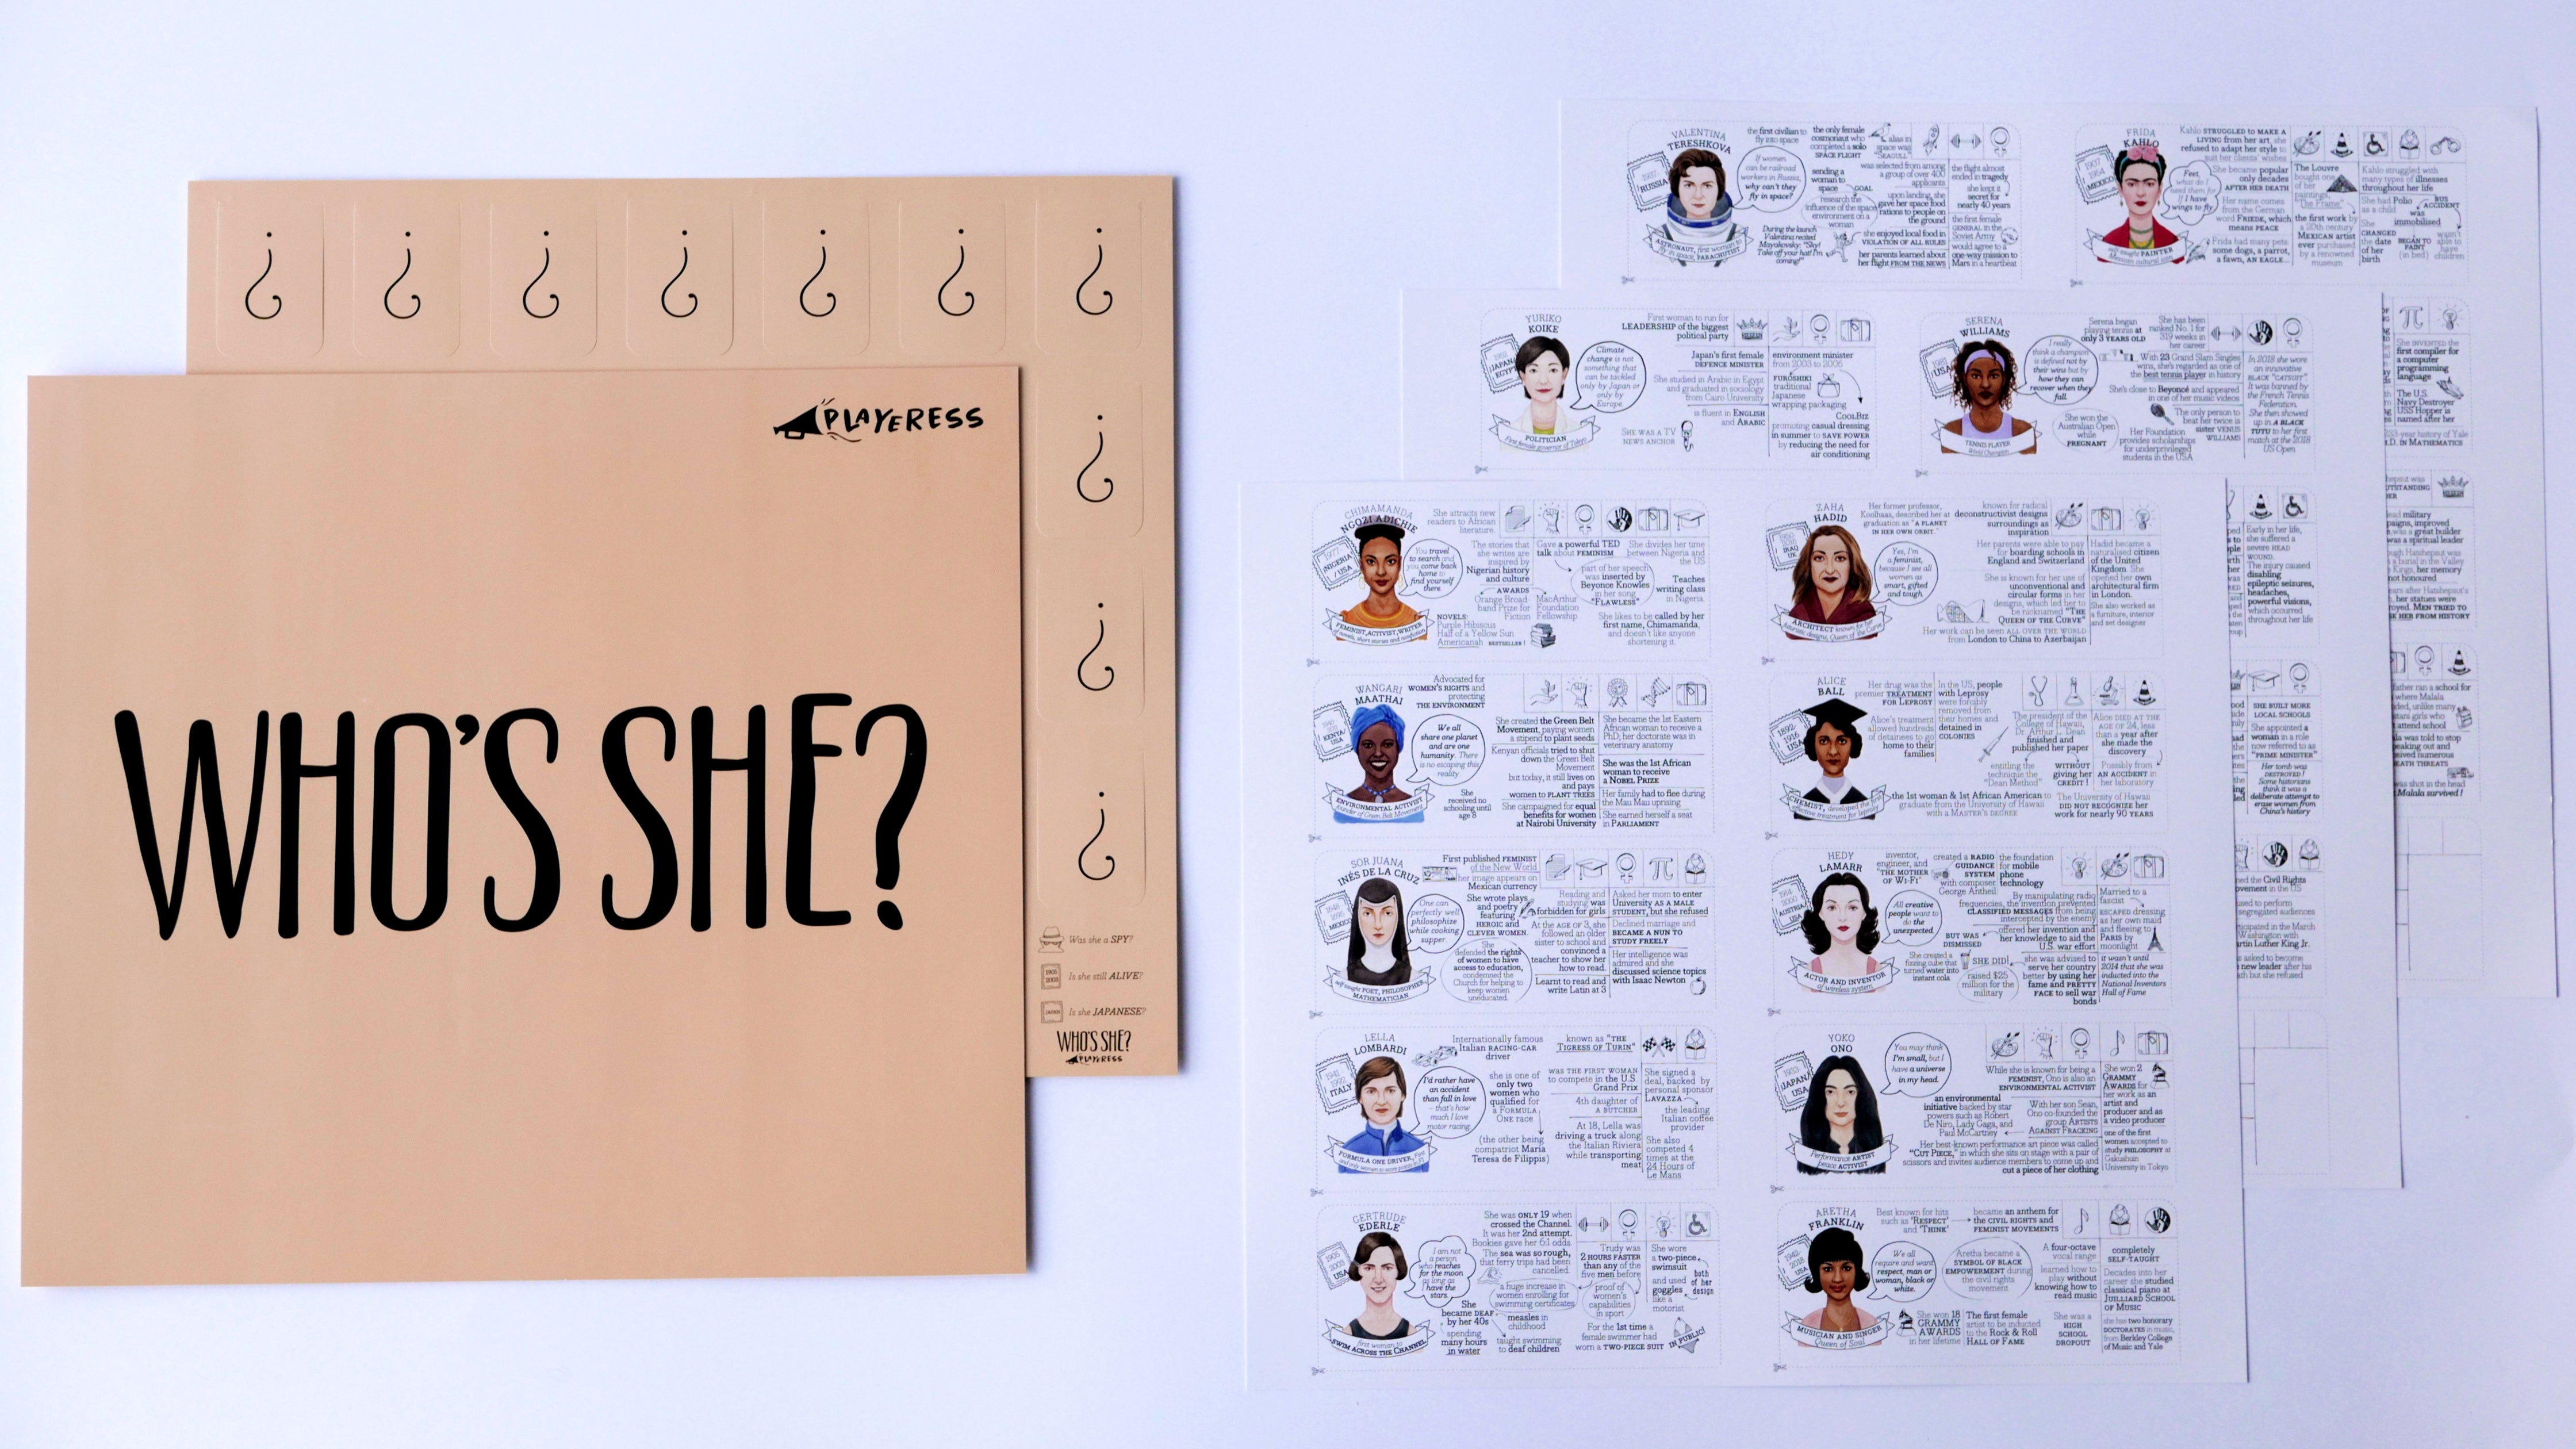 WHO'S SHE? paper game